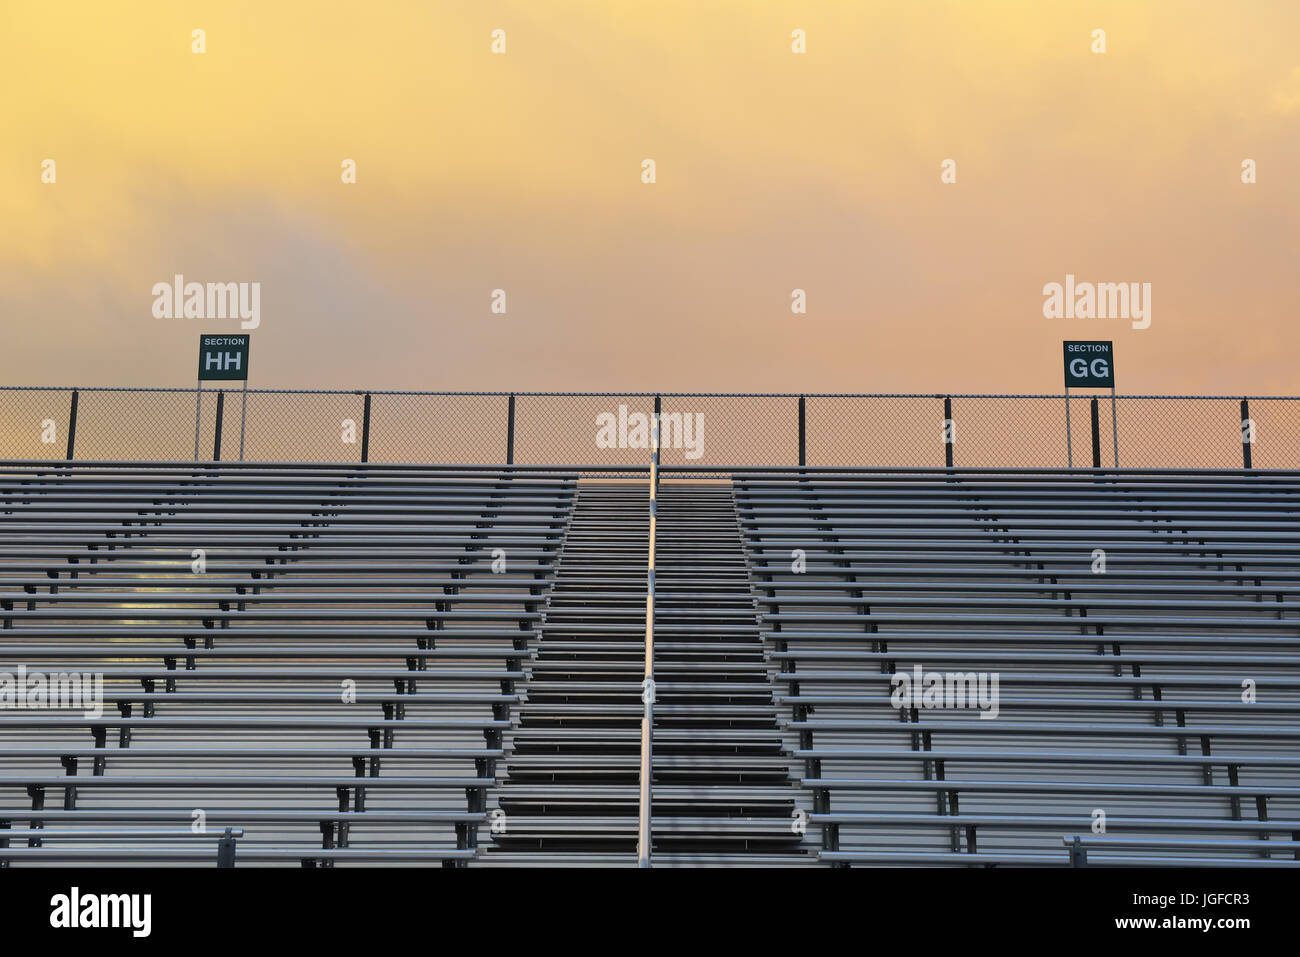 Image of empty stands in a stadium Stock Photo